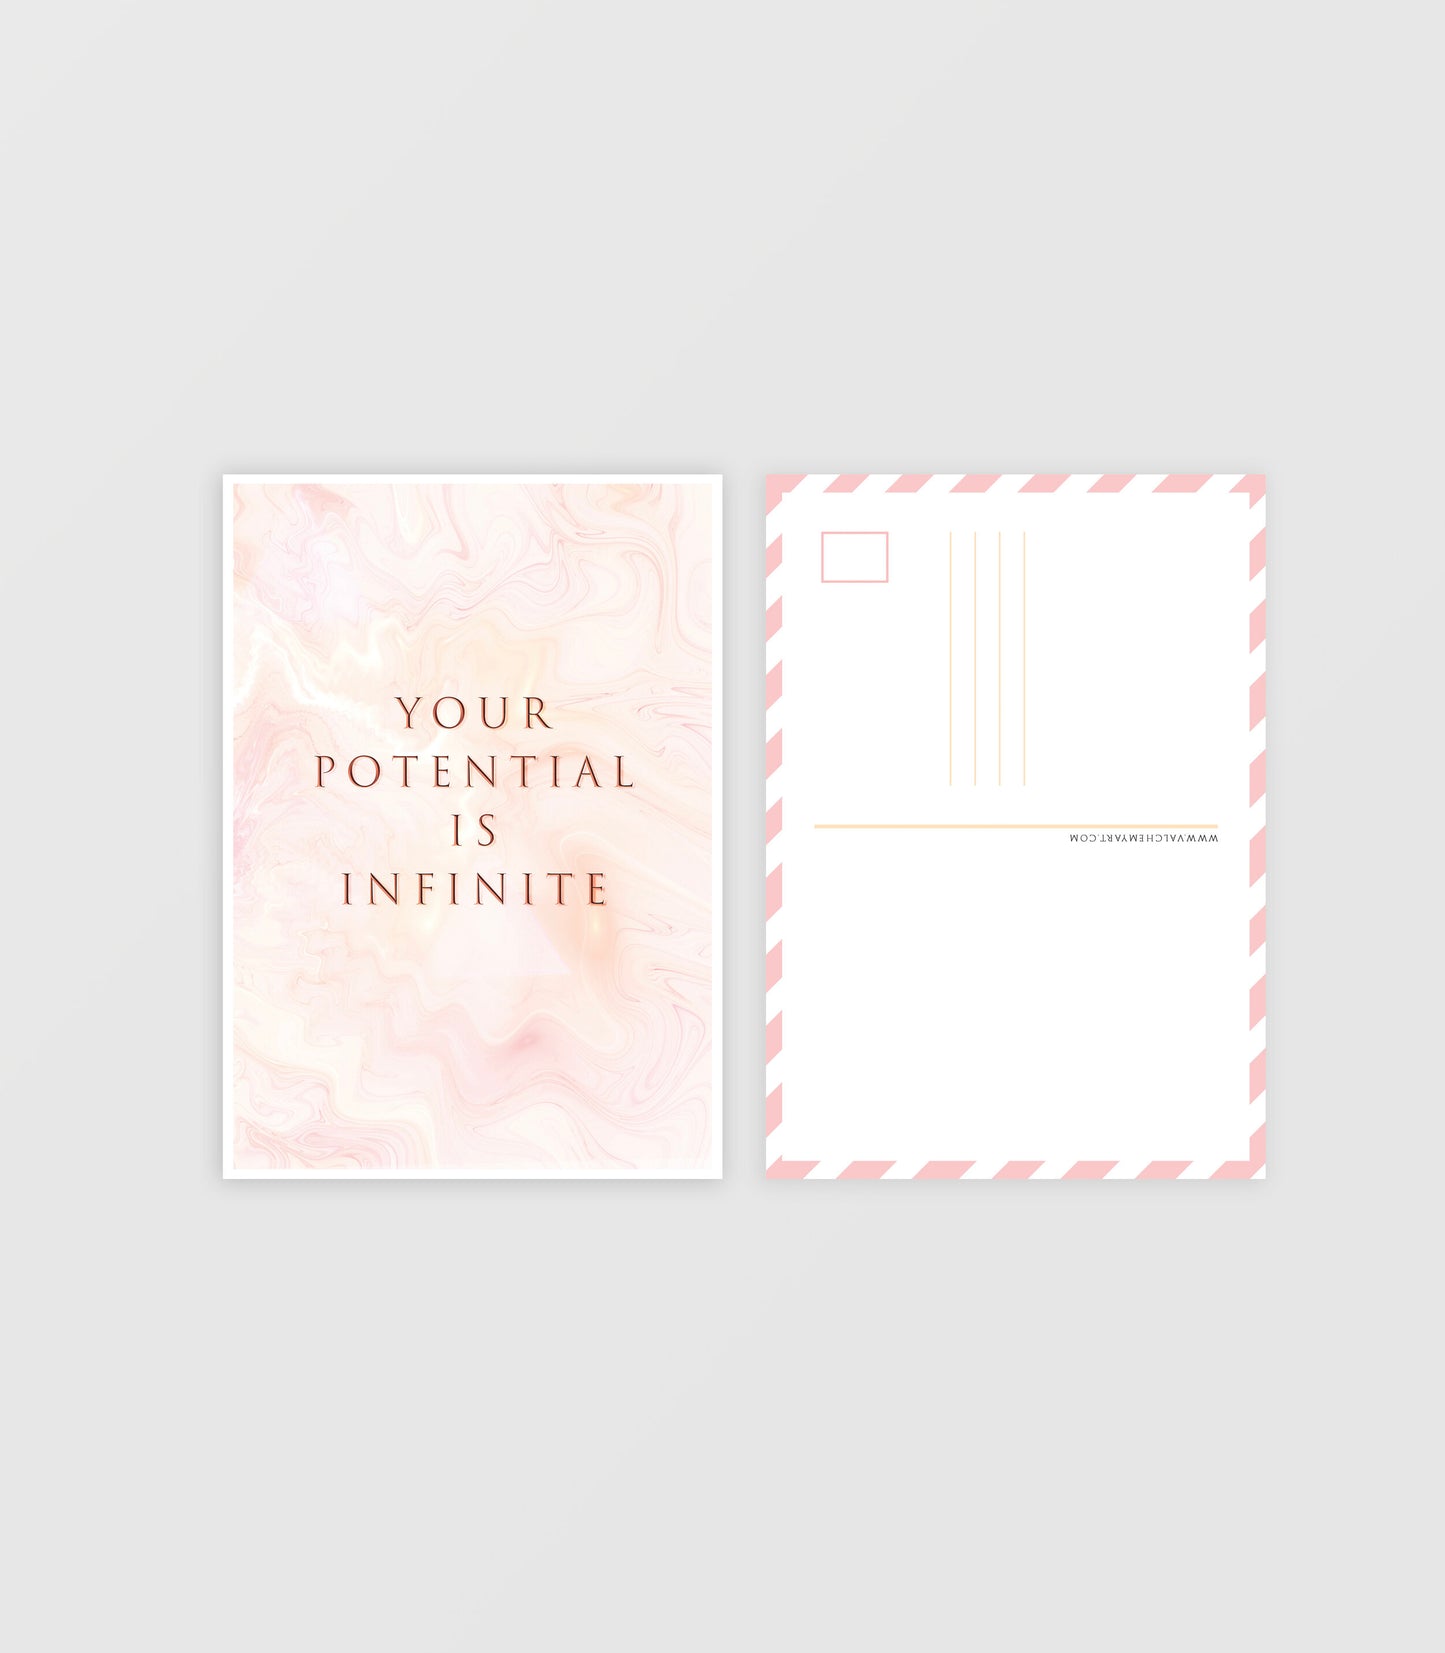 YOUR POTENTIAL IS INFINITE POSTCARD